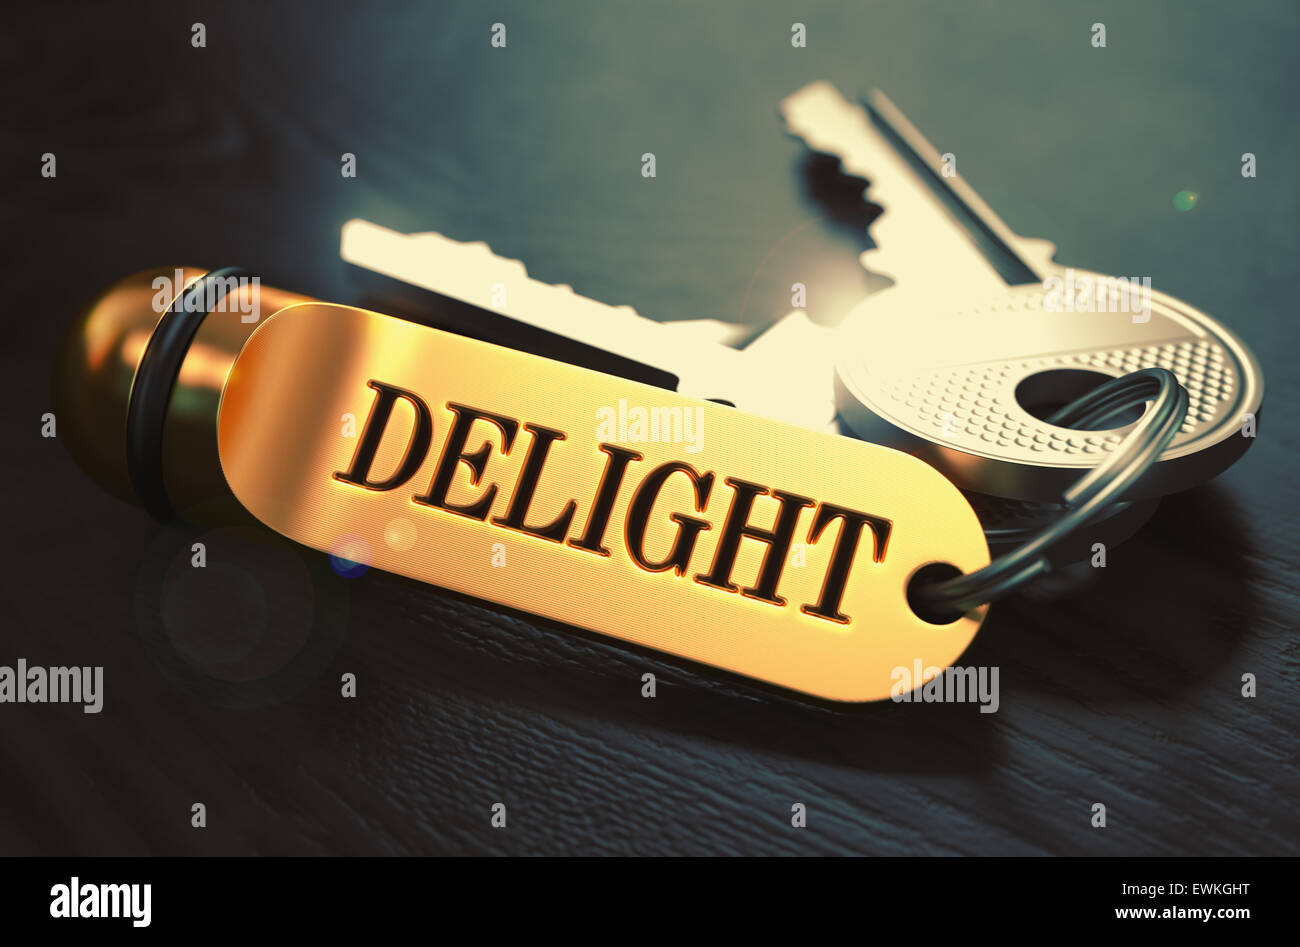 Delight Concept. Keys with Golden Keyring. Stock Photo